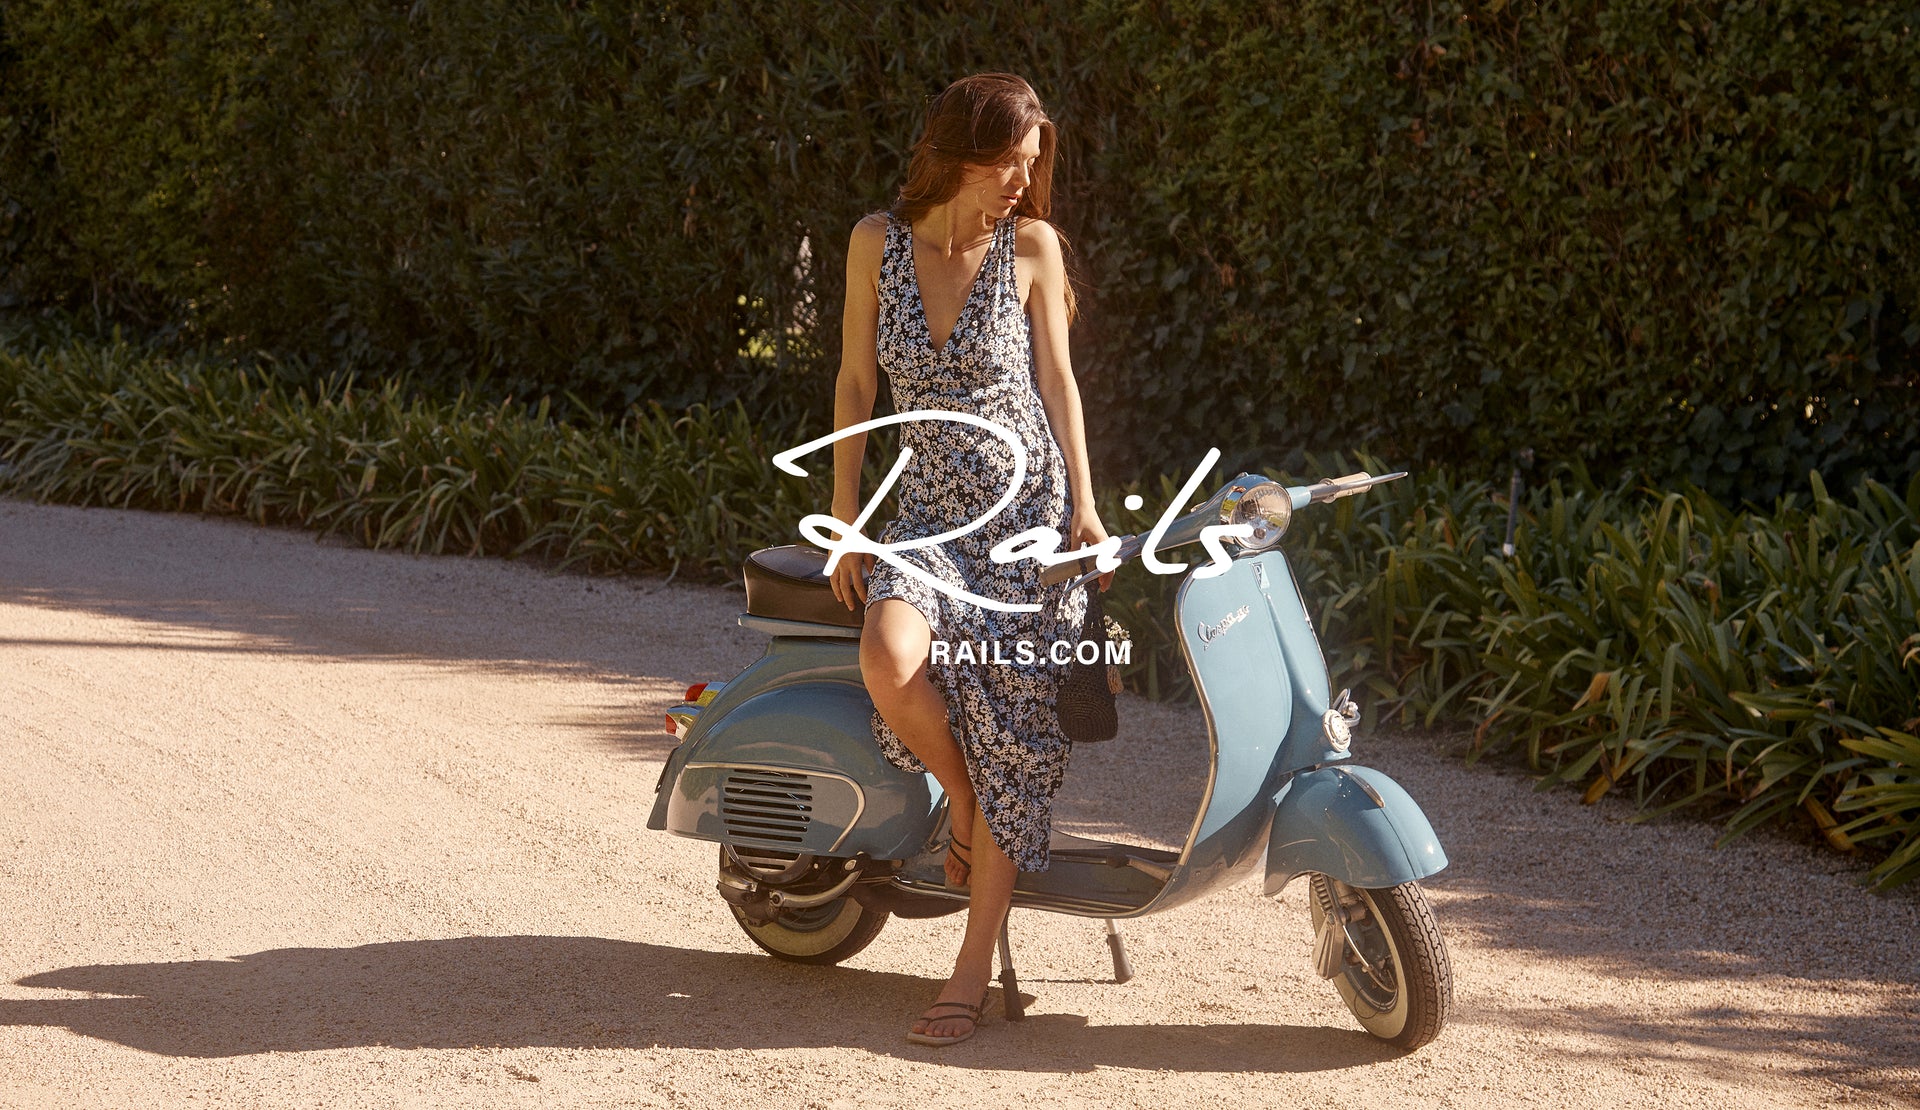 EDITORIAL IMAGE OF MODEL ON VESPA WEARING AUDRINA DRESS